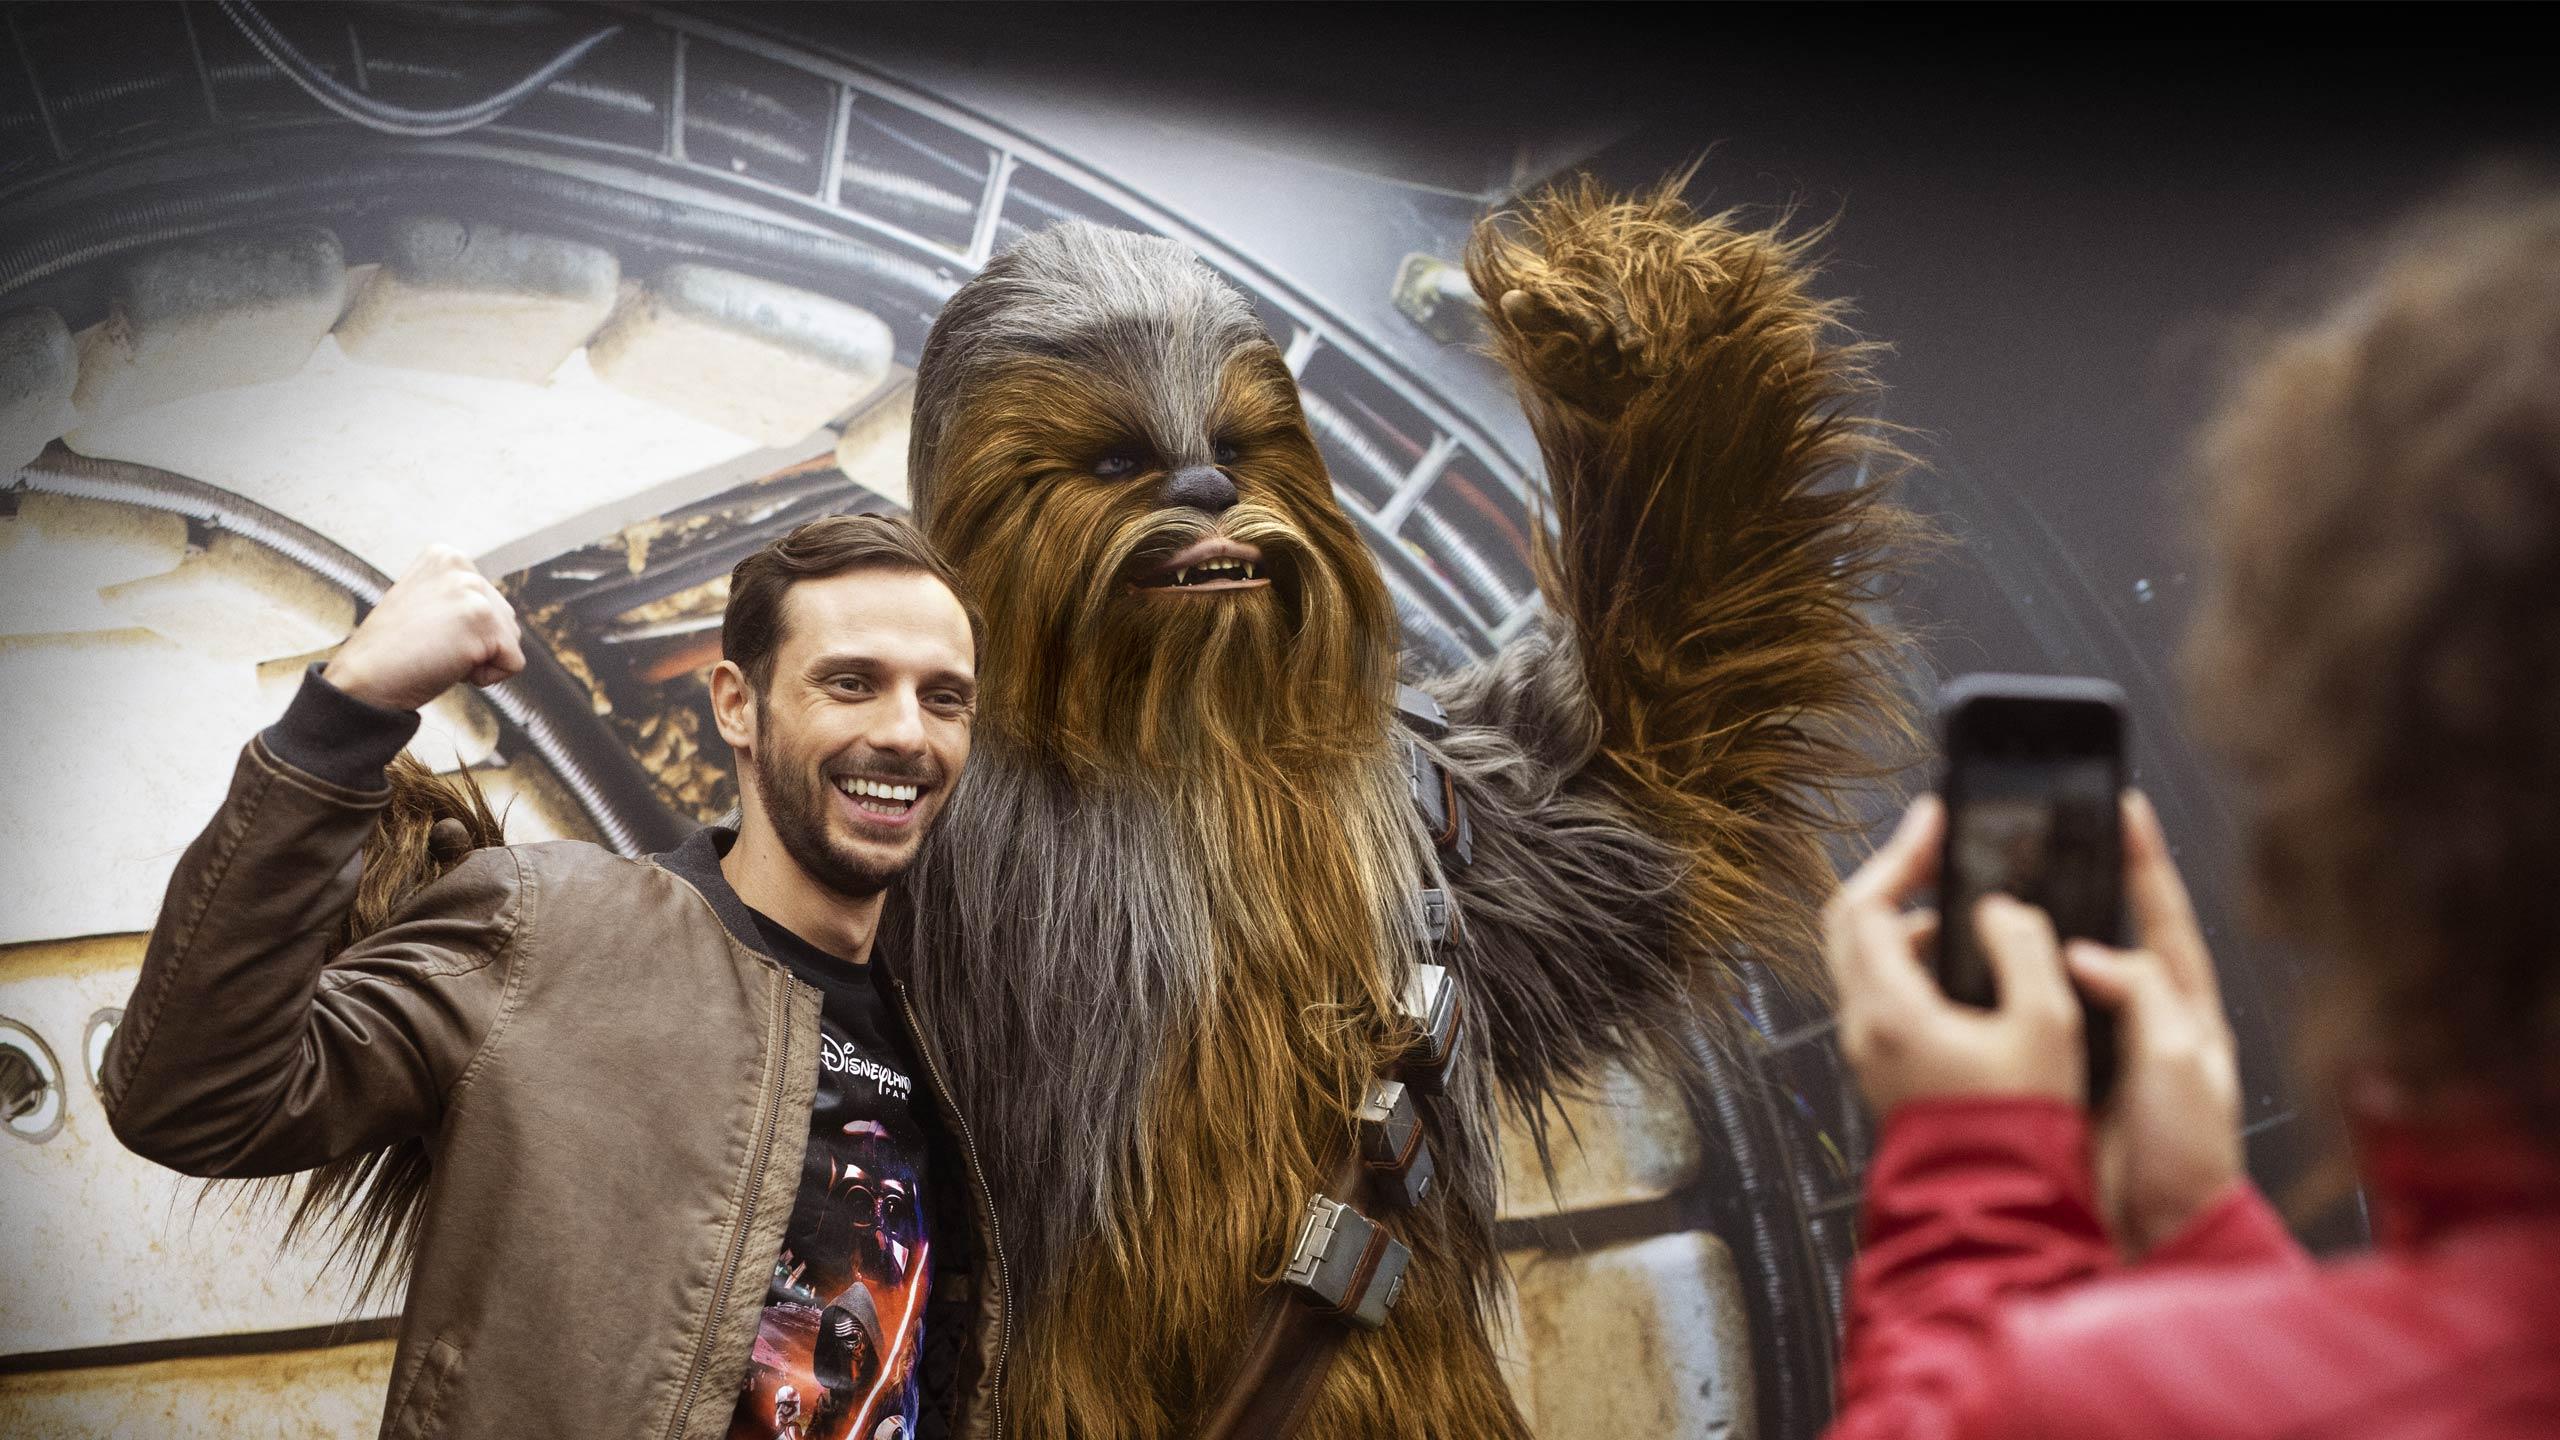 Image of An Encounter with Chewbacca